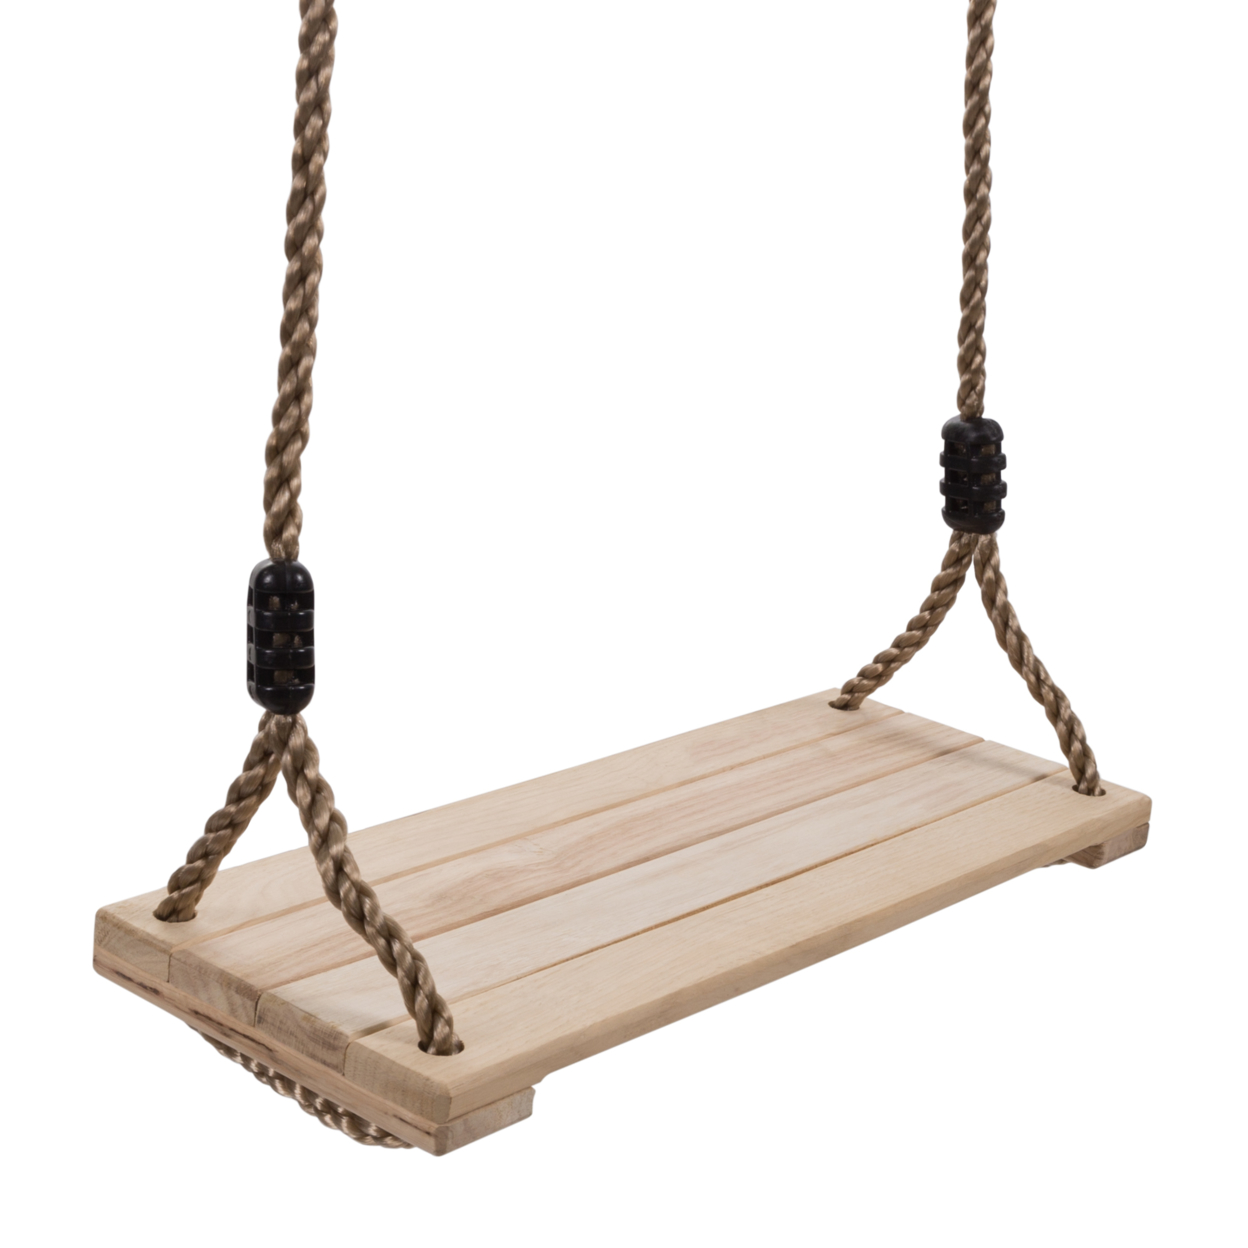 Wooden Tree Swing With Ropes Toddlers Kids Hanging Swing Outdoor Play